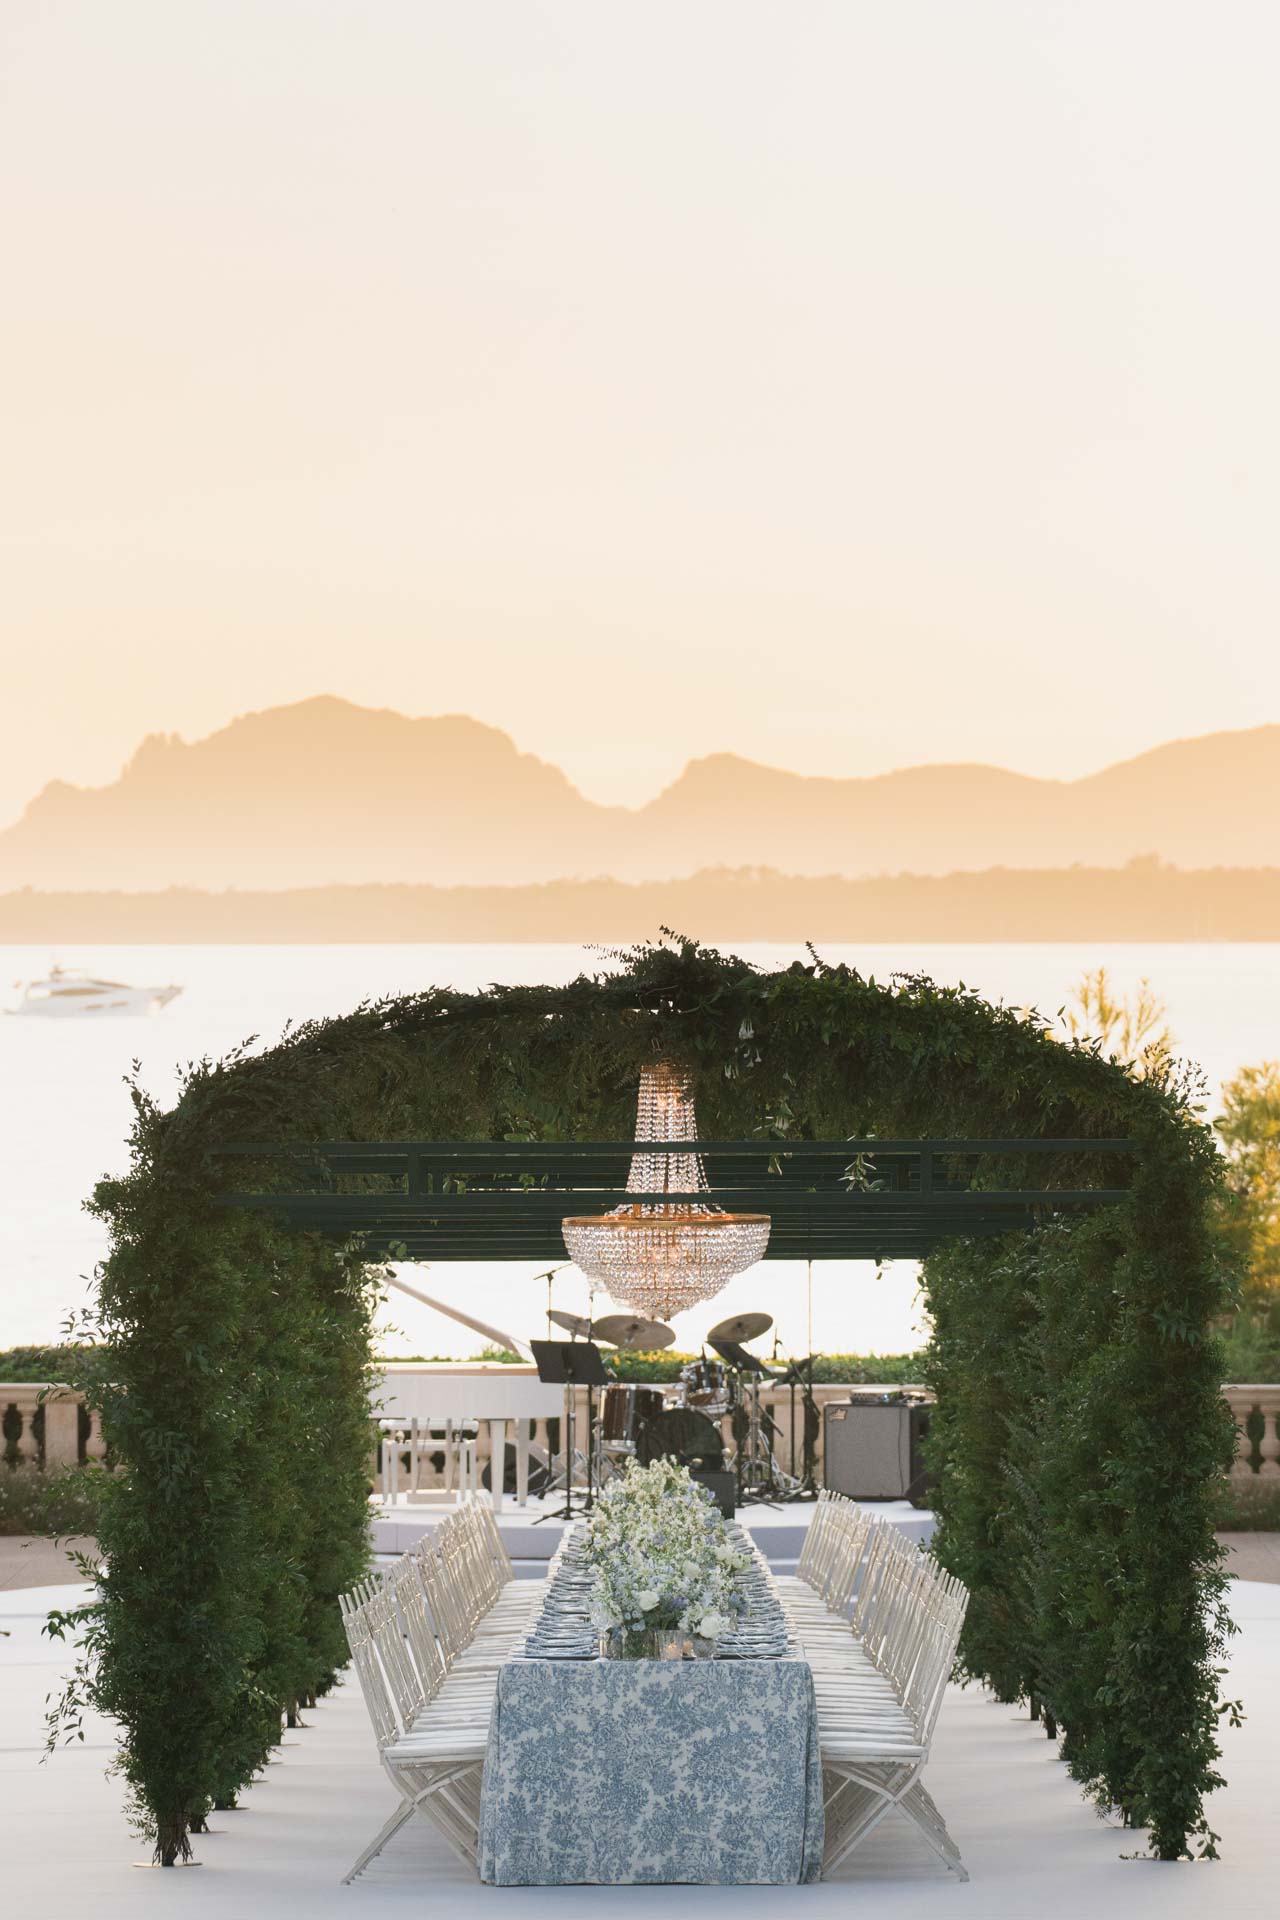 Rachel and Erez: A “Return to the Age of Elegance” on the French Riviera :: 116